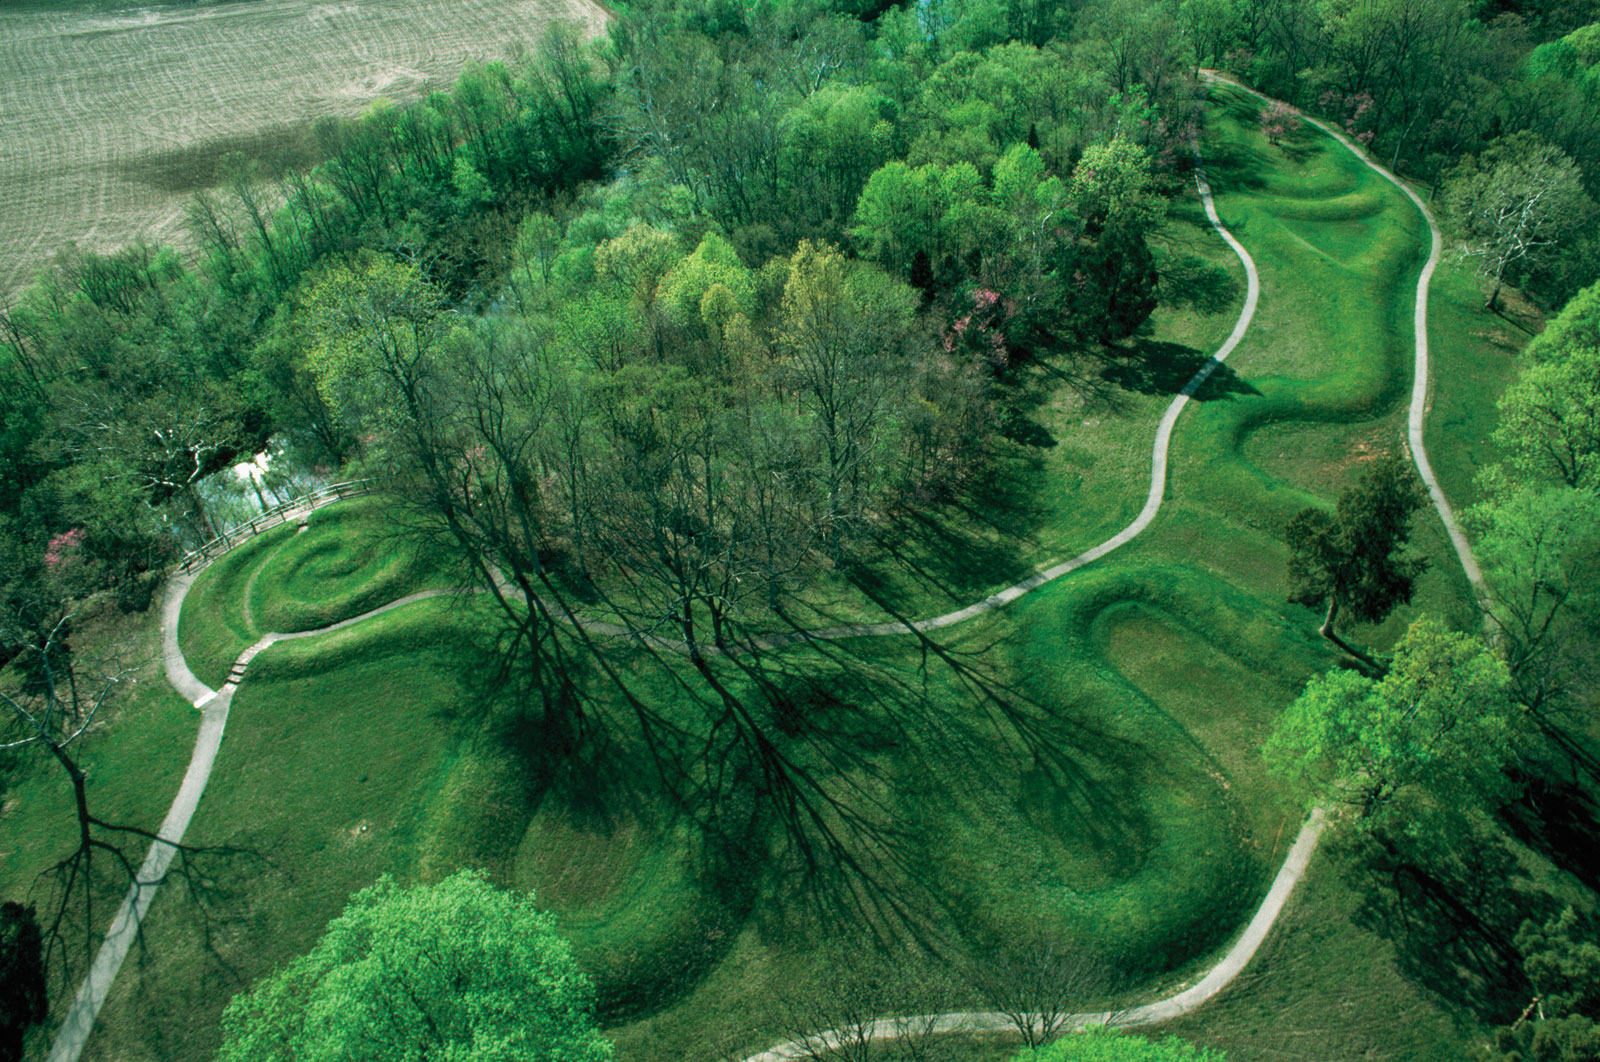 Native American serpent mound in Ohio. c. 1070 CE Voyage